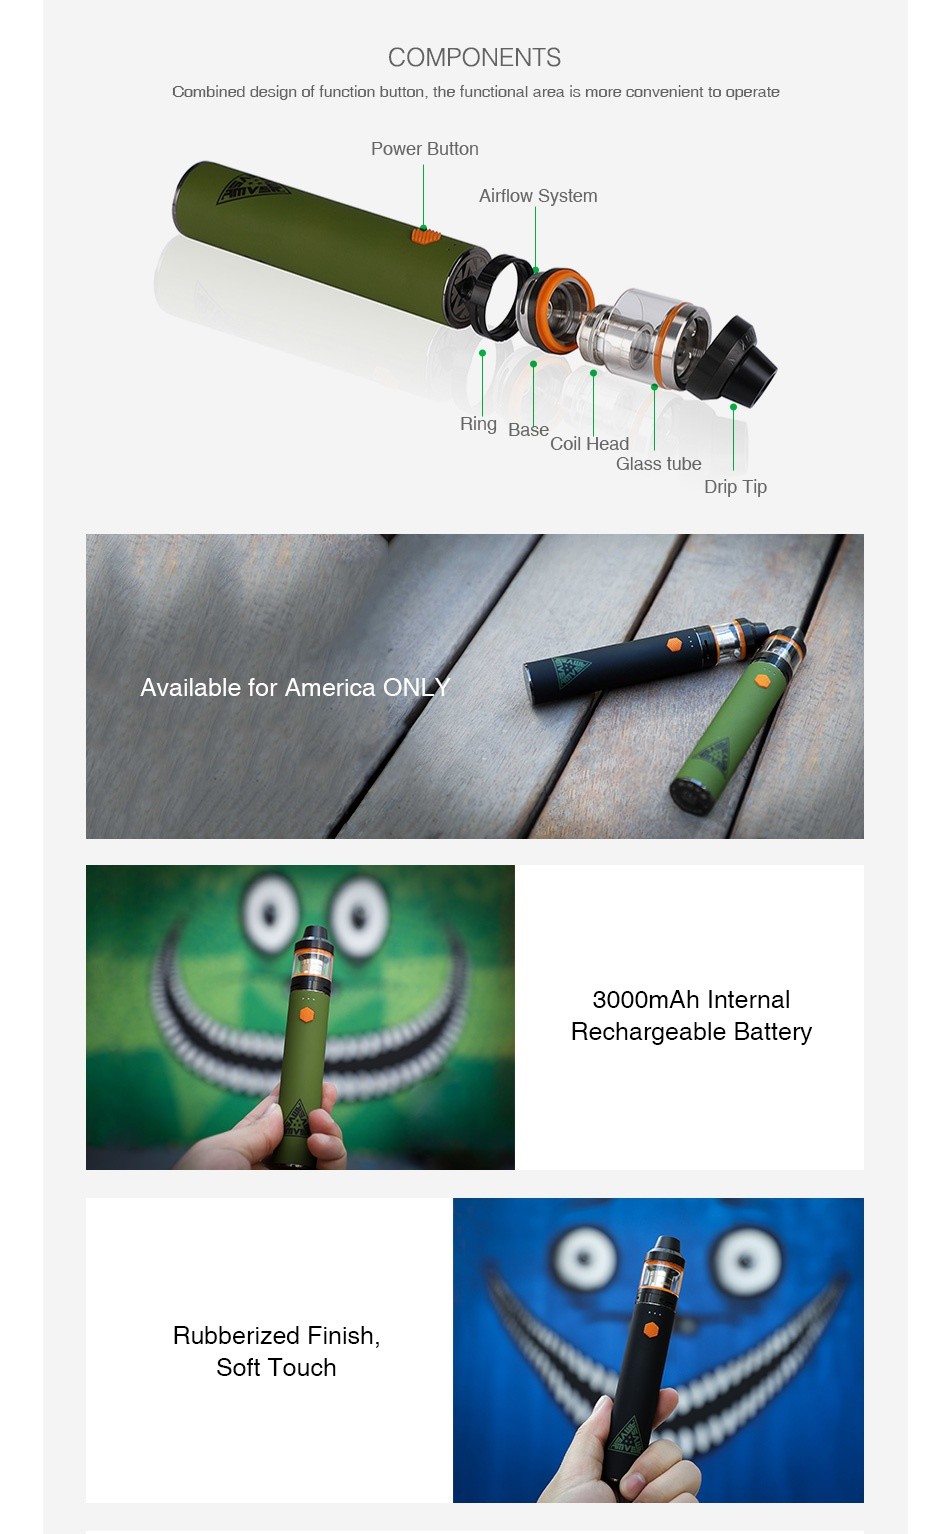 [US ONLY] Innokin AMVS Starter Kit 3000mAh COMPONENTS Combined design of function button  the functional area is more convenient to operate Power button Airflow System Base Coil head Glass tube Drip I ip Available for America ONL 3000mAh Internal Rechargeable Battery Rubberized finish Soft touch